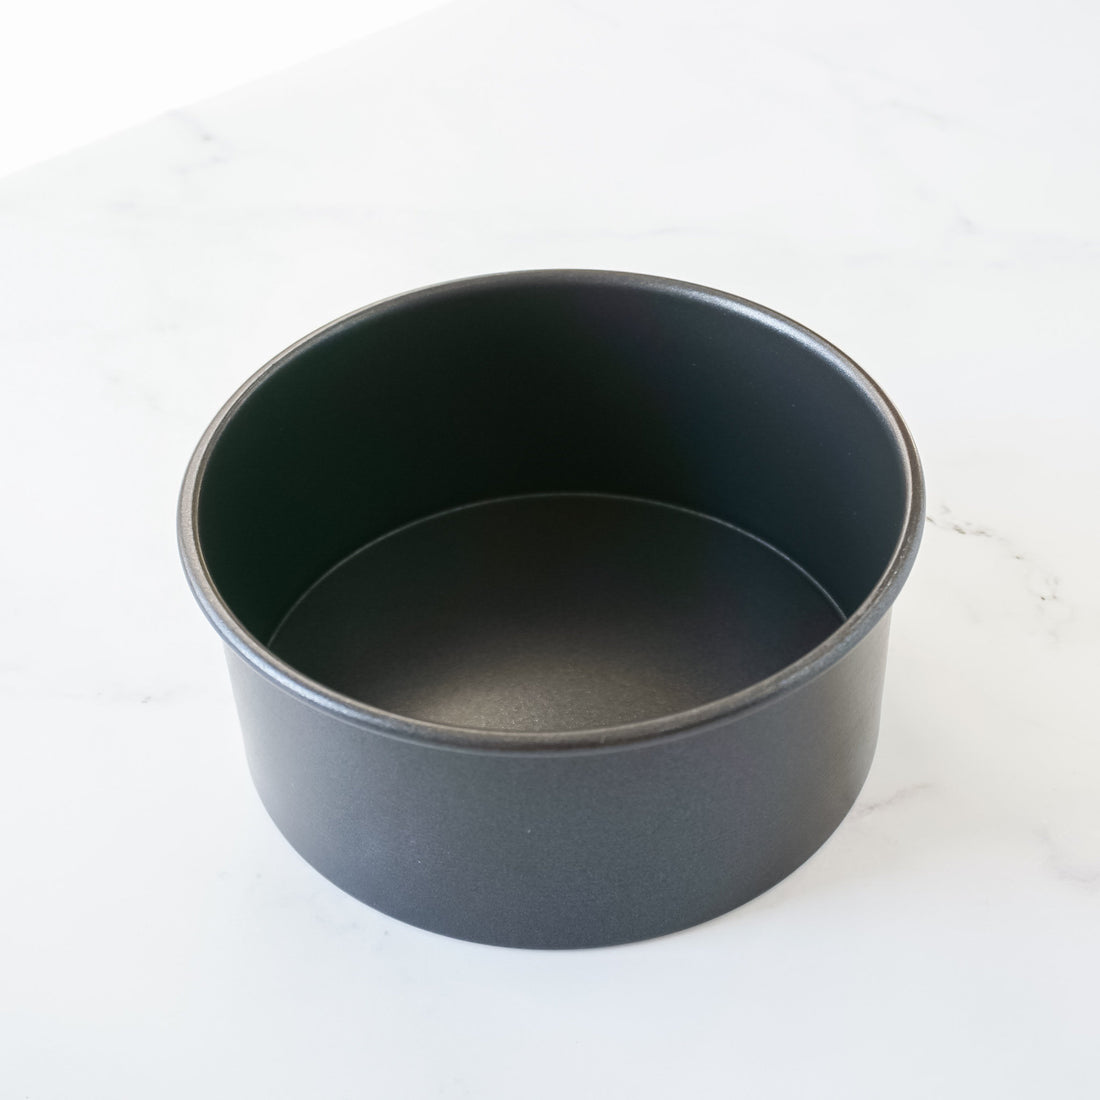 6 inch round cake pan with removable bottom